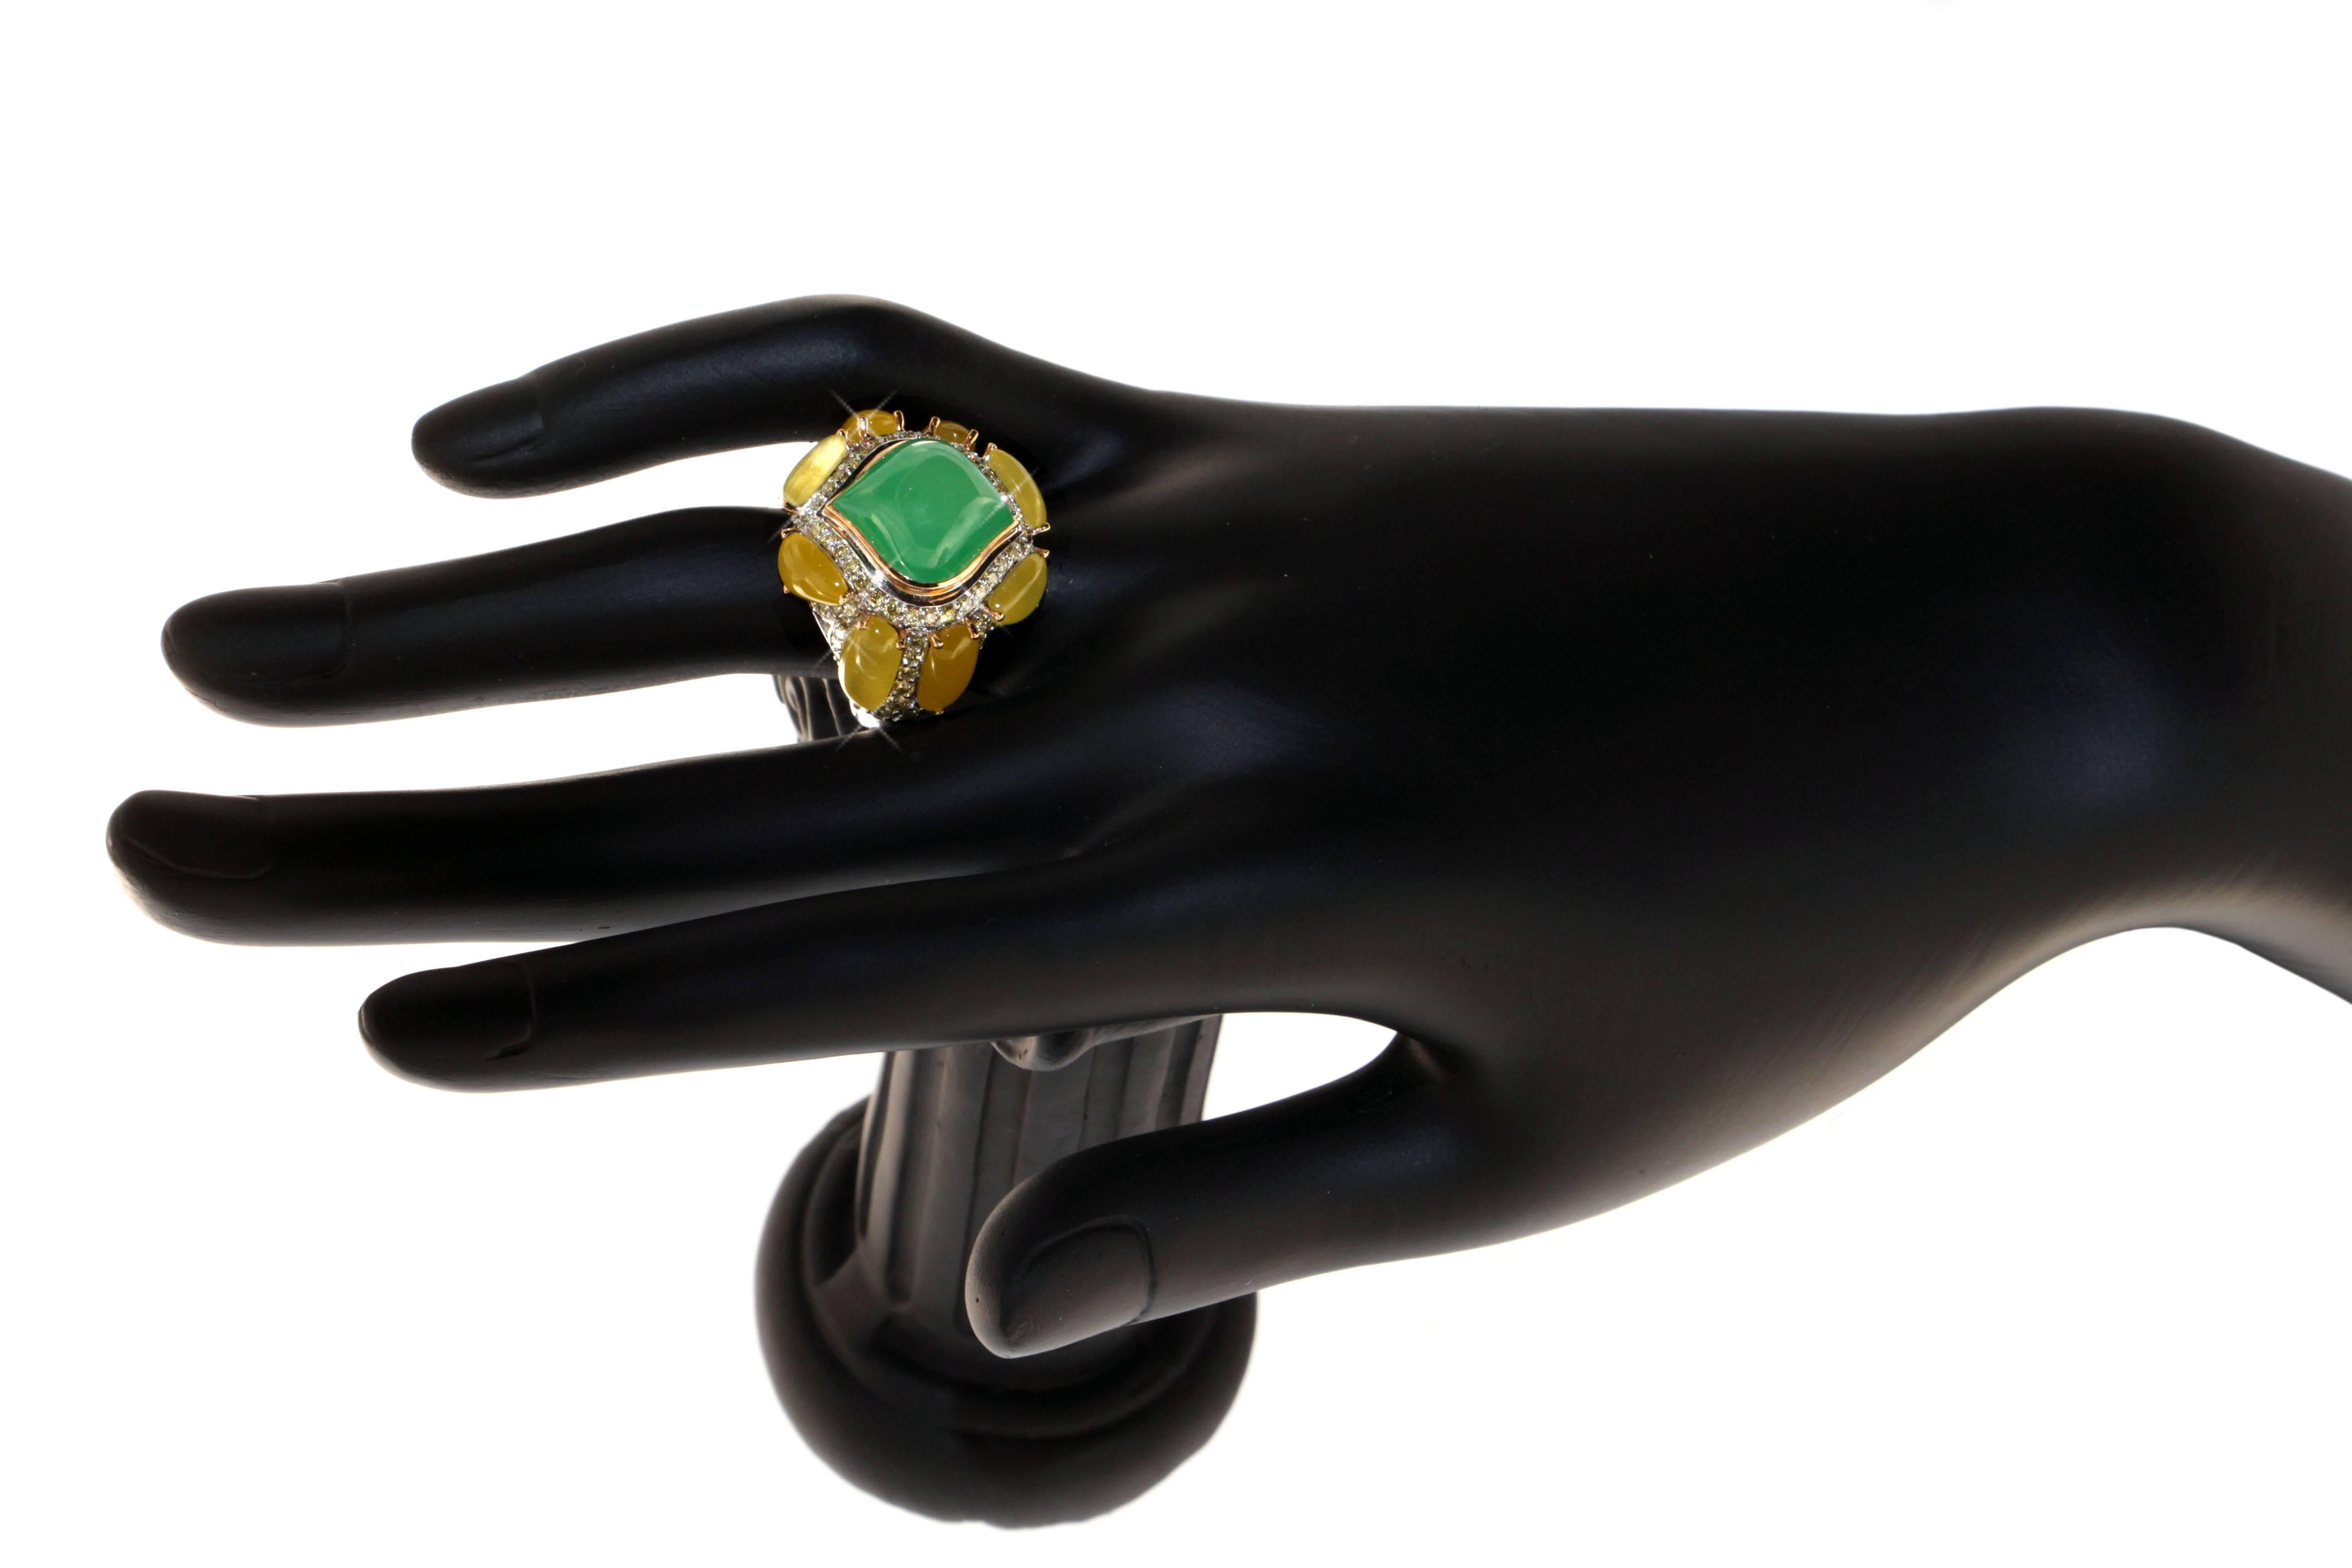 The green-burst sunflower, Mother Nature's favorite plant and the inspiration behind the Budding Sunflower ring, a Zorab Creation.

Crafted from yellow jade, each 